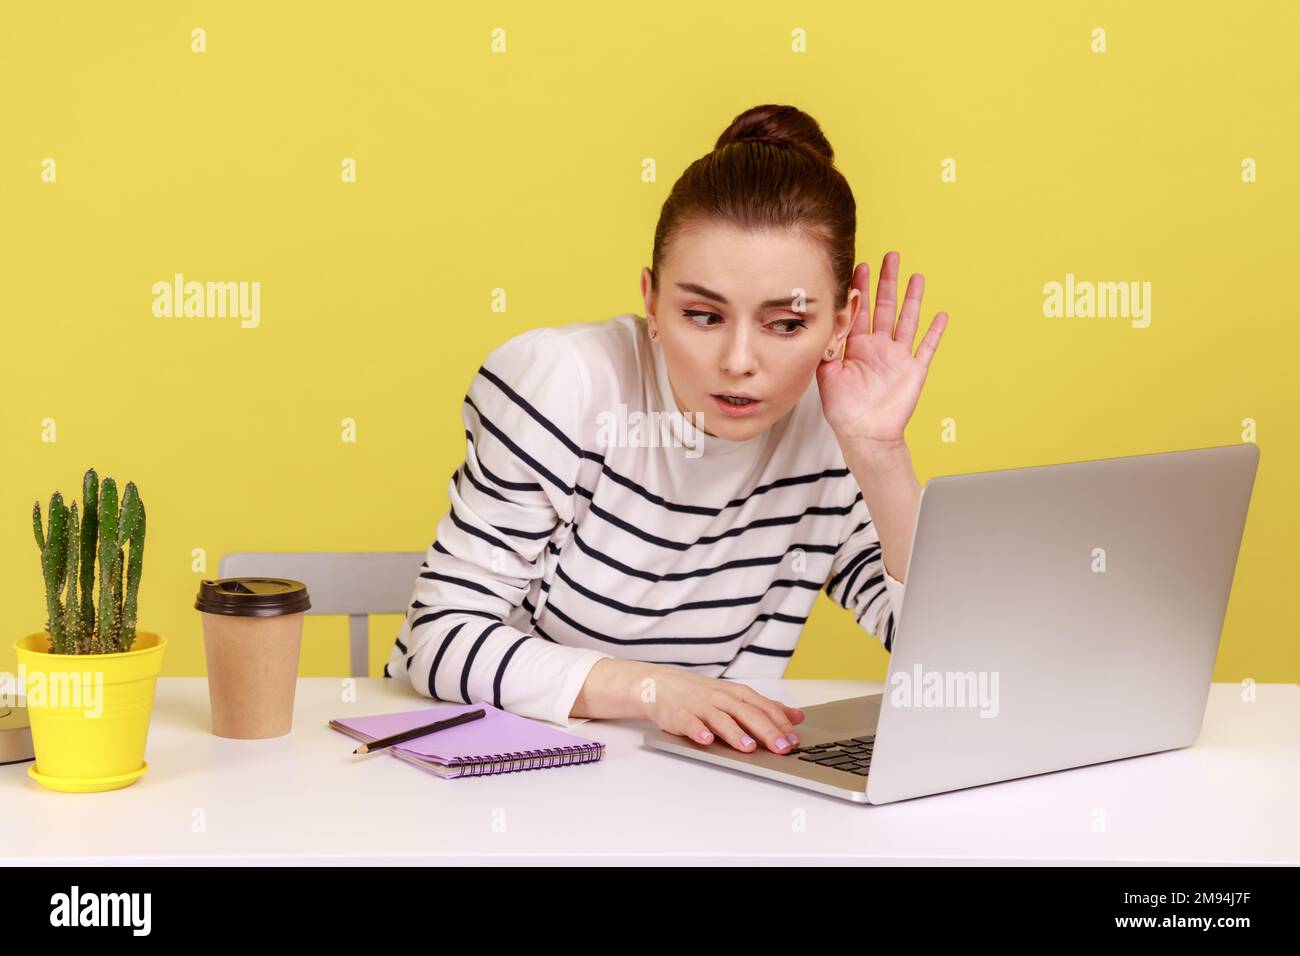 I can't hear you. Woman holding arm near ear trying to listen secret talk on video call on laptop, bad internet connection, online conference. Indoor studio studio shot isolated on yellow background. Stock Photo